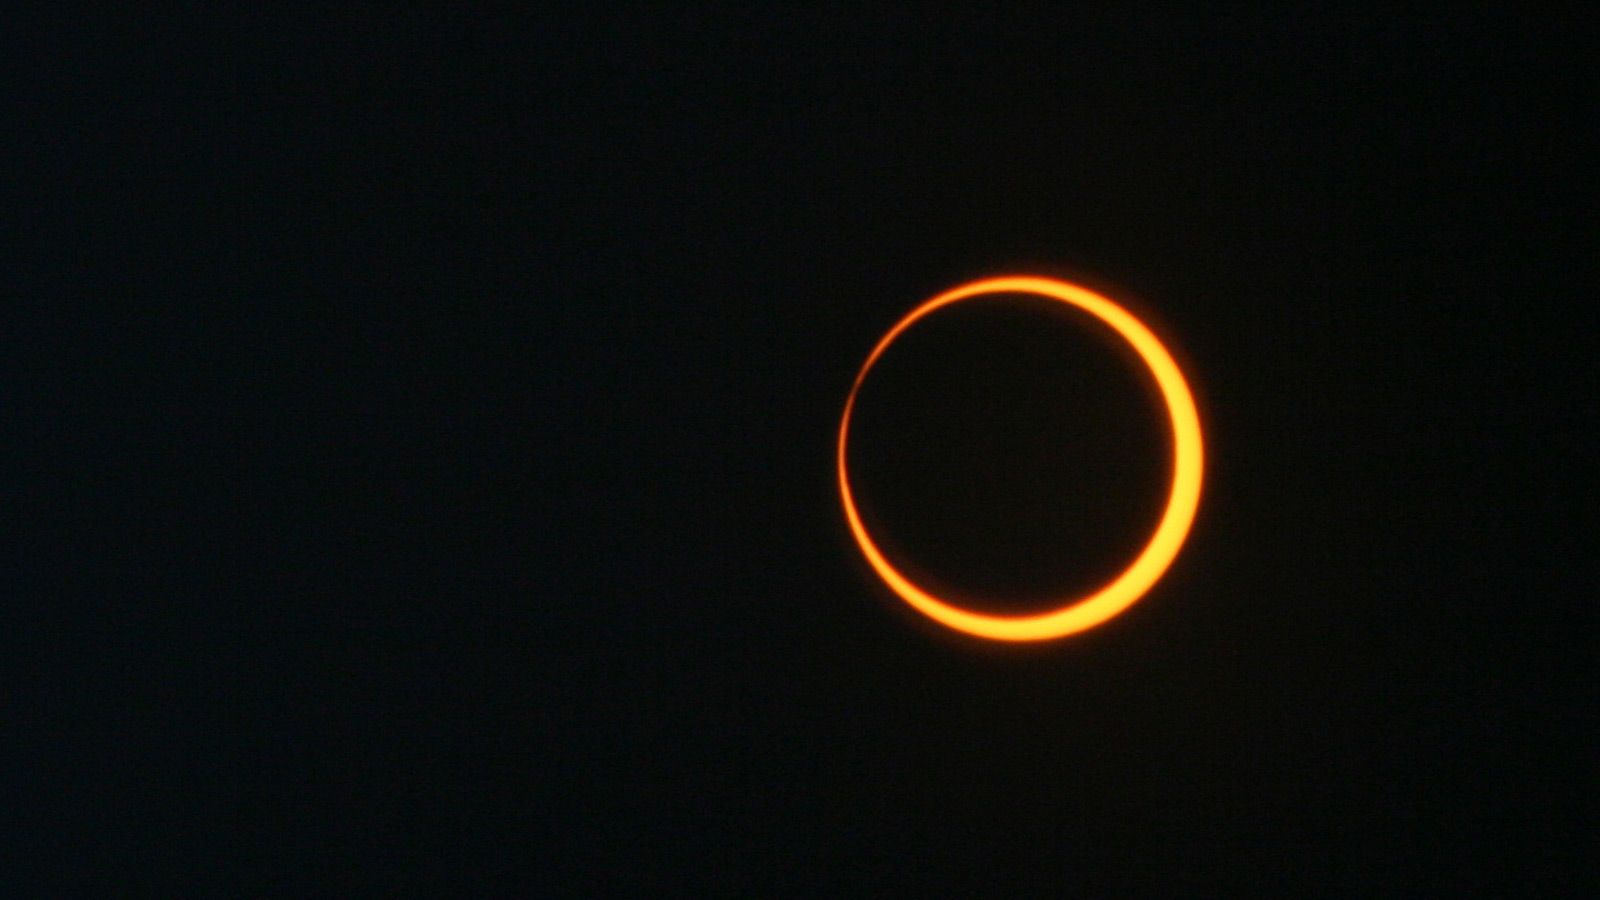 An annular eclipse showing the Sun's orange ring around the Moon's silhouette against a dark black sky